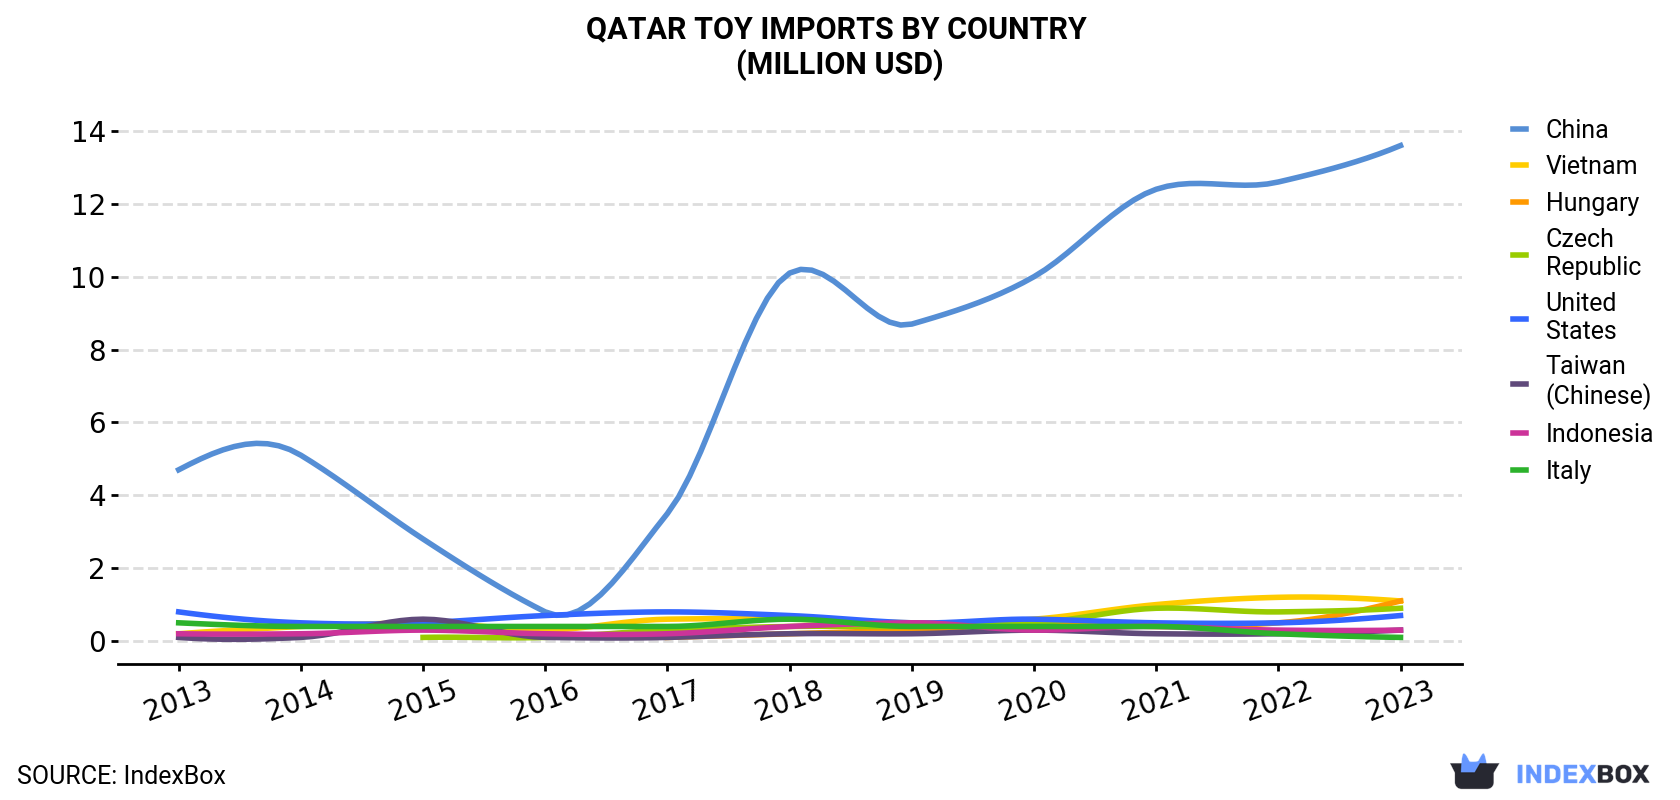 Qatar Toy Imports By Country (Million USD)